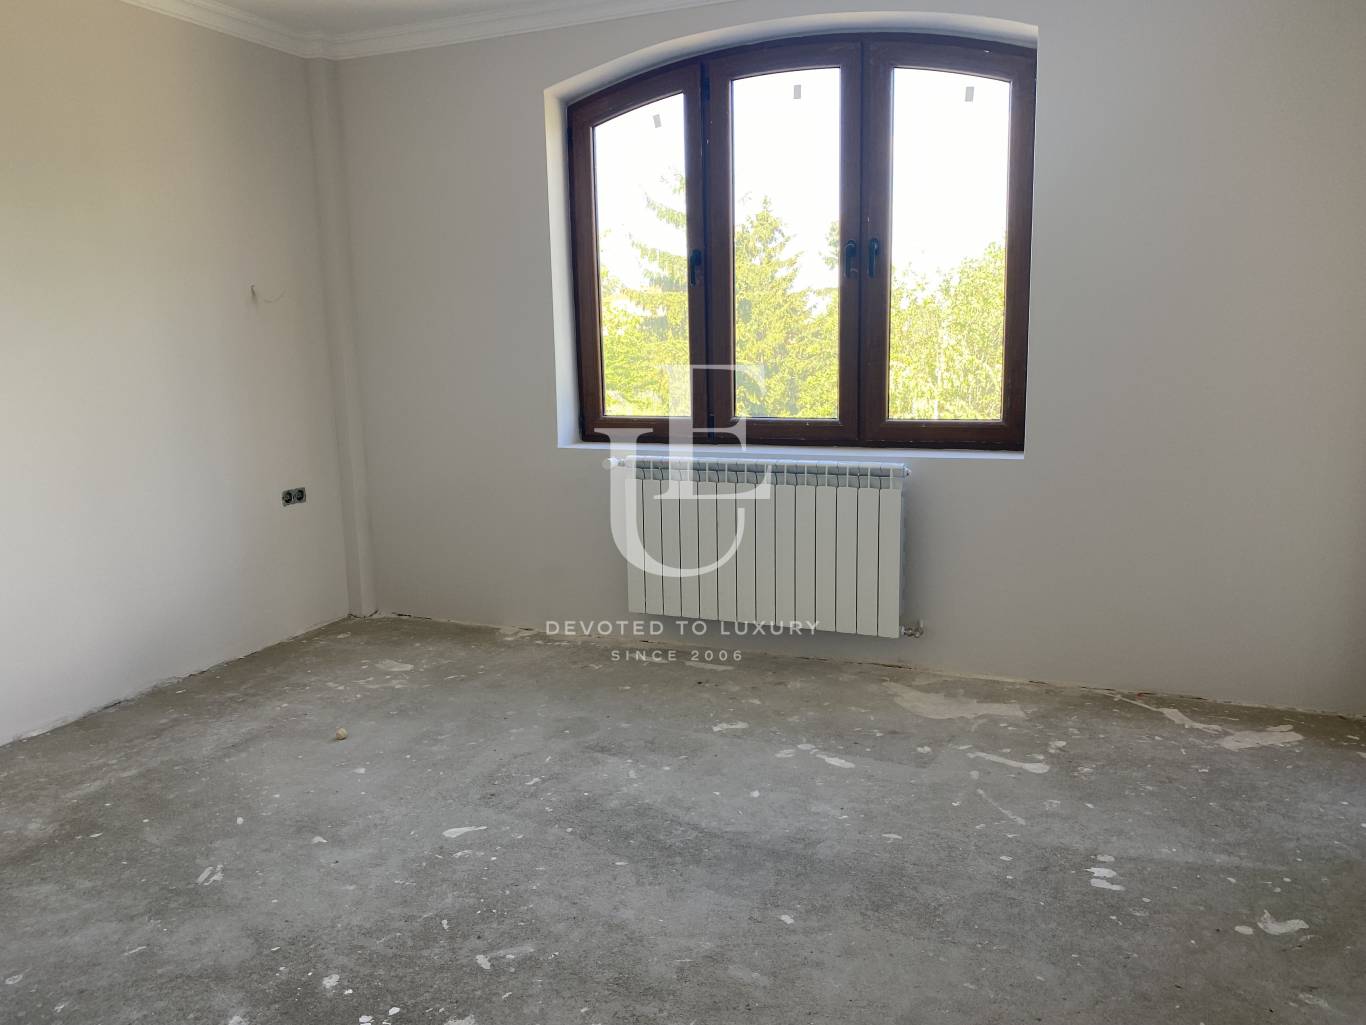 House for sale in Sofia, Bistritsa with listing ID: K18047 - image 9